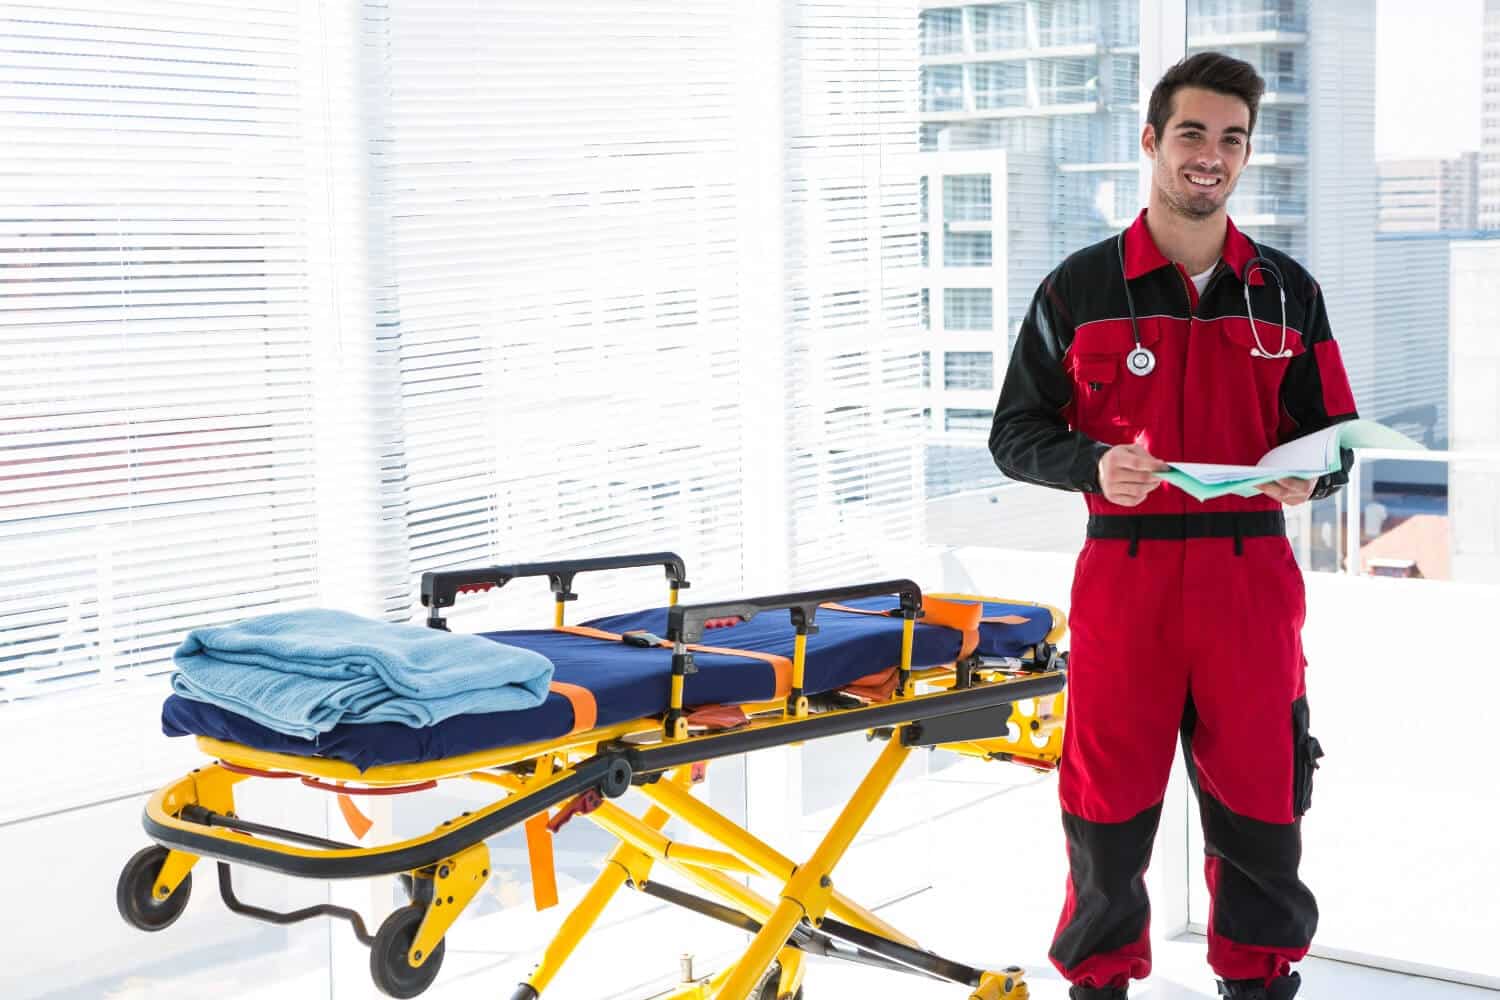 The perks of being a paramedic: what makes this career rewarding?